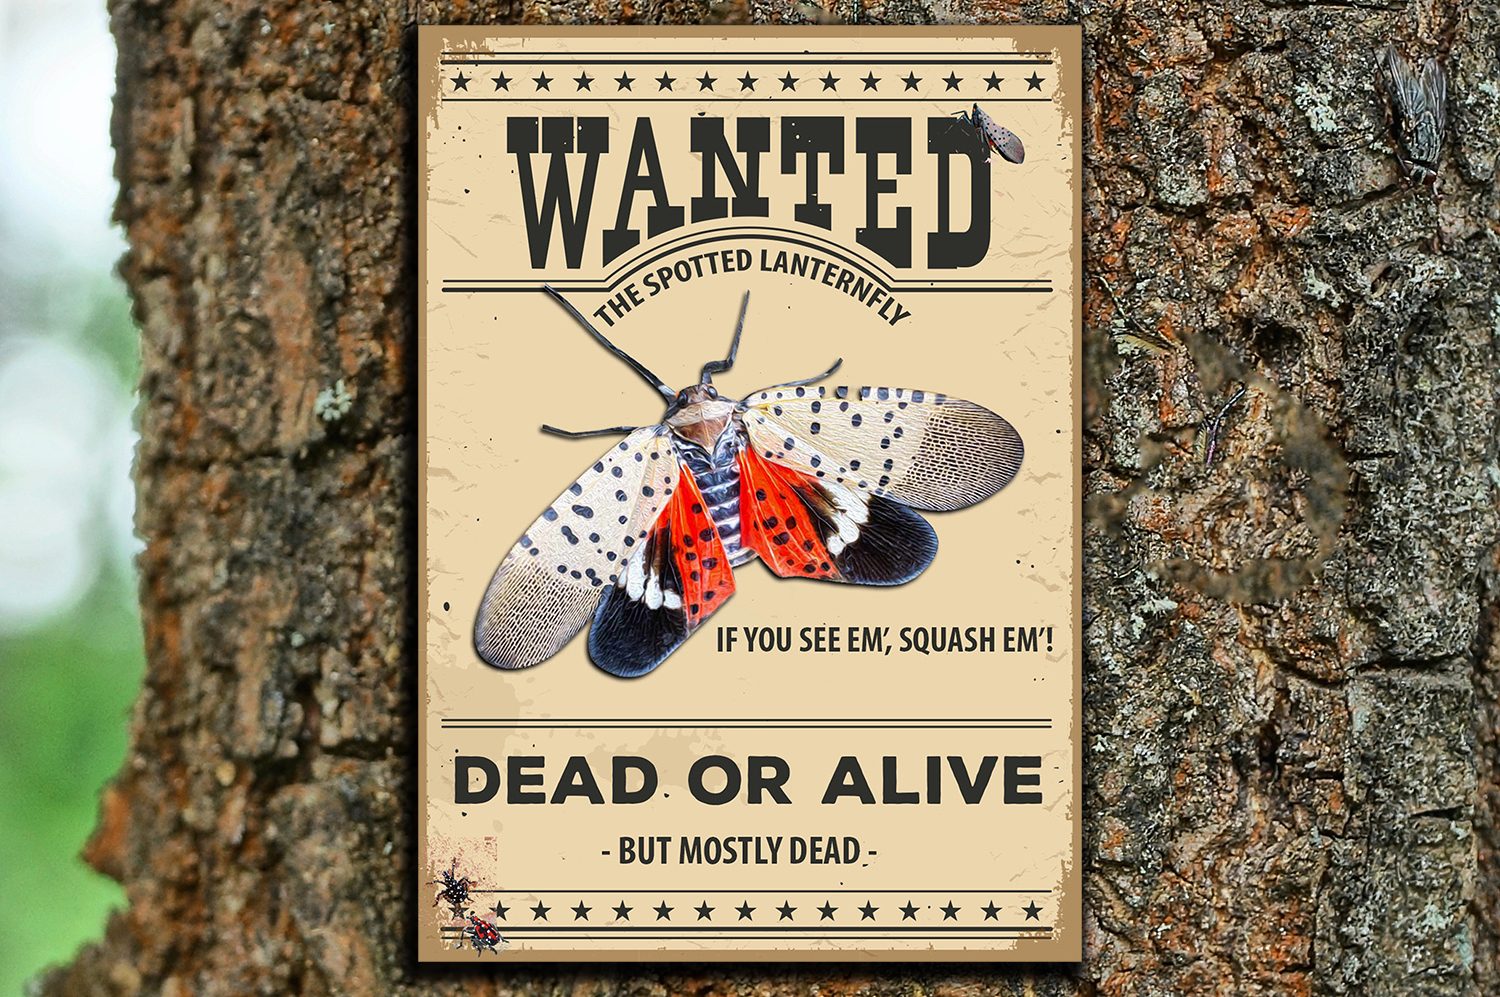 A wanted poster for the spotted lanternfly that says if you see them, squash them.